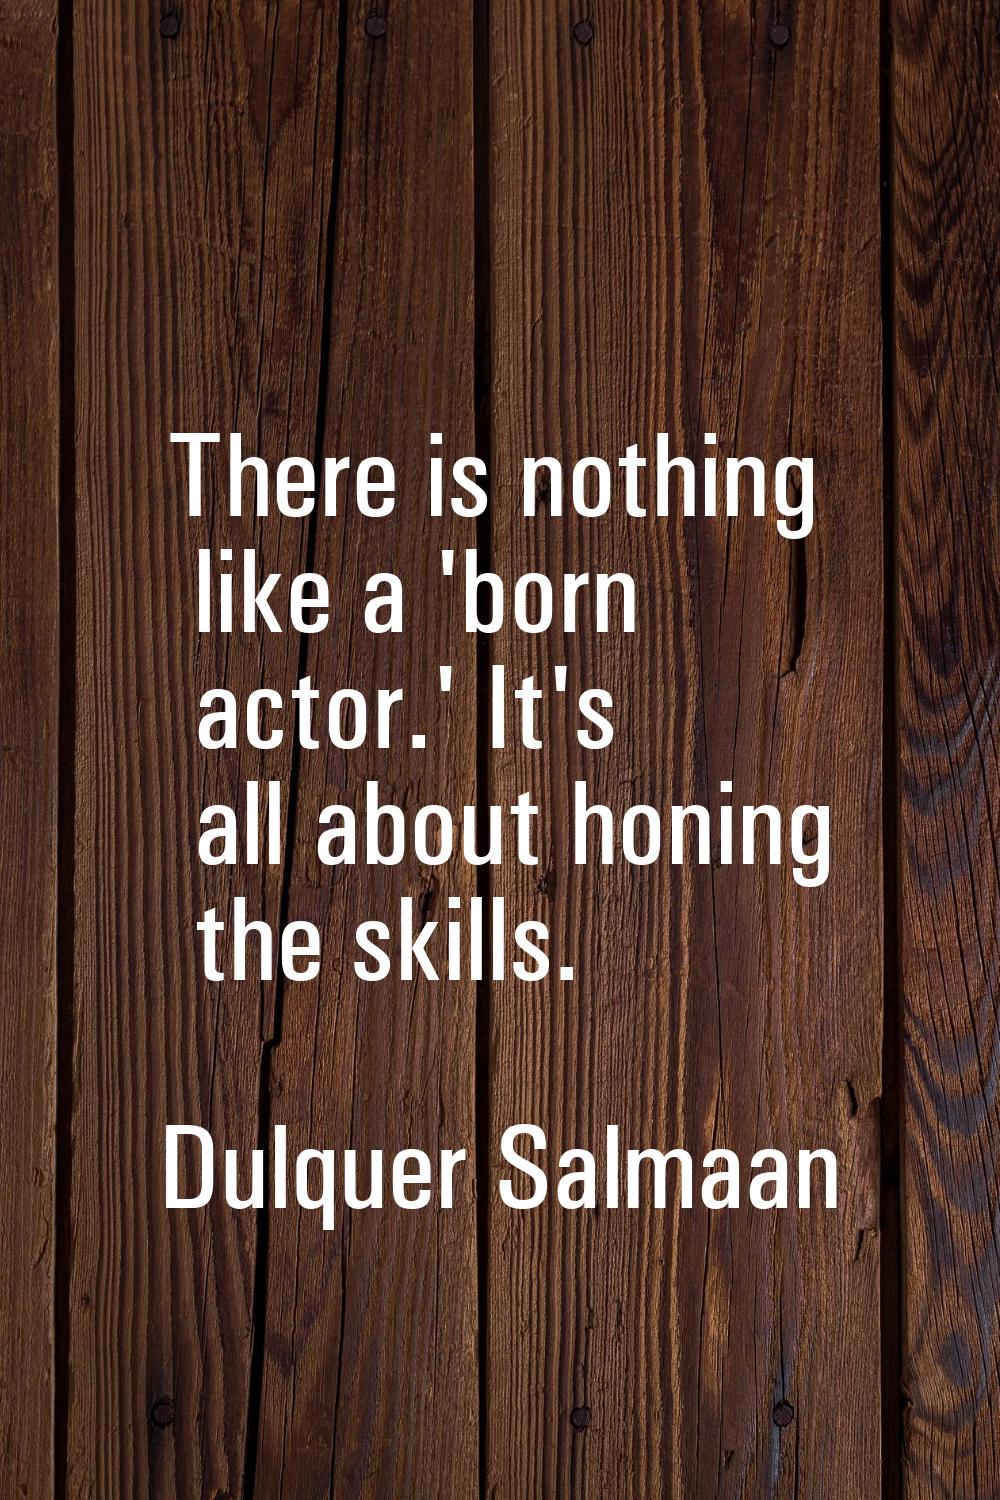 There is nothing like a 'born actor.' It's all about honing the skills.